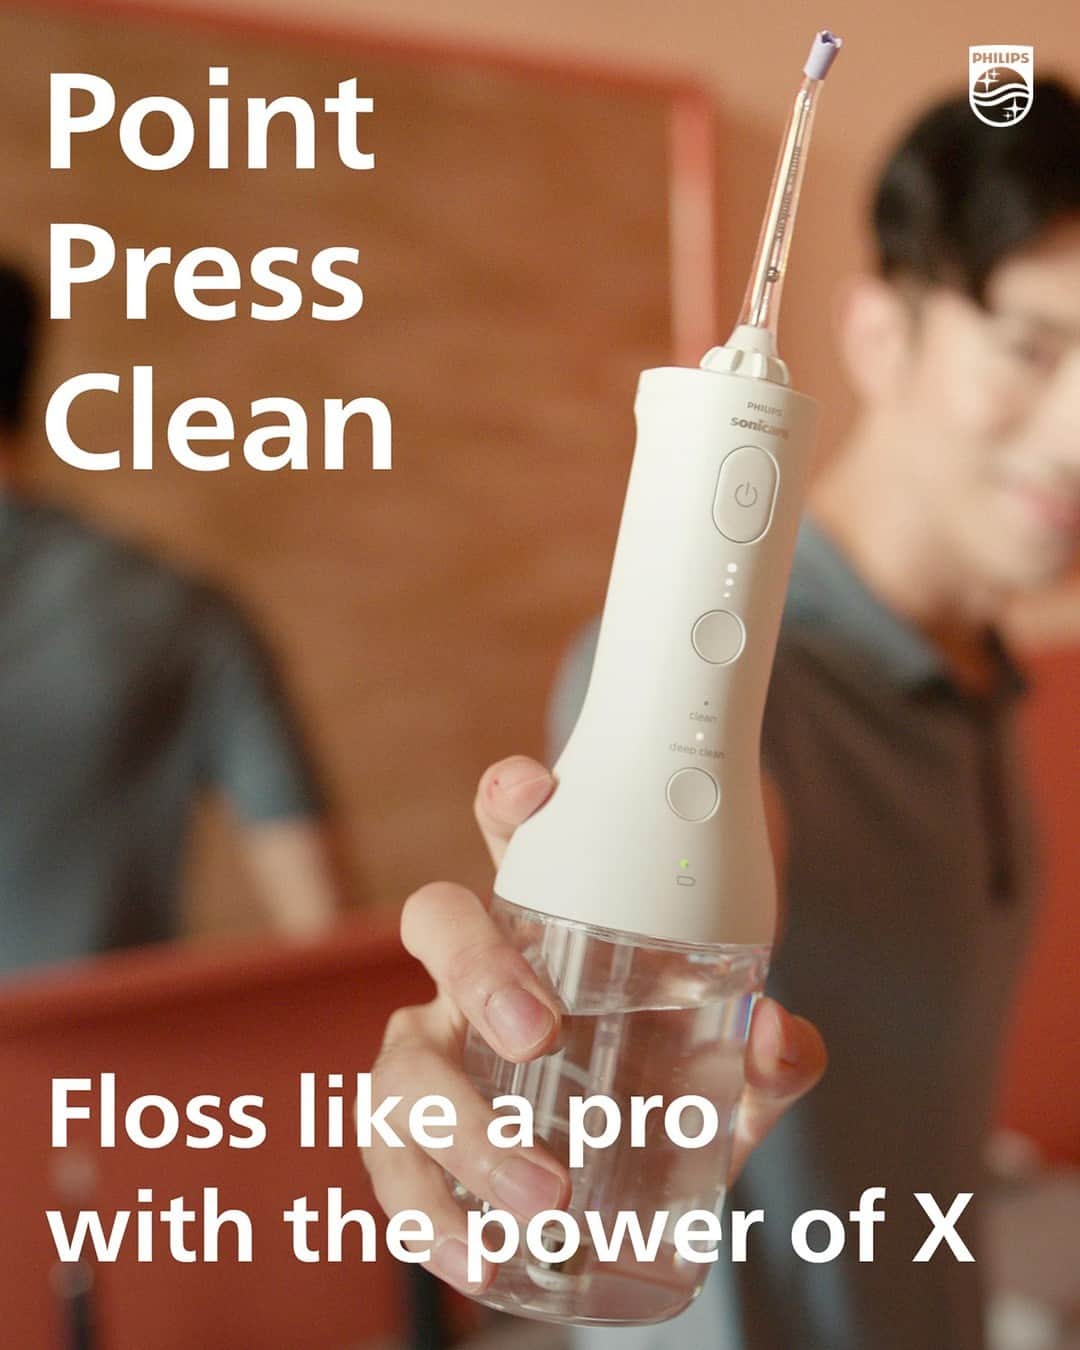 Philips Sonicareのインスタグラム：「Flossing is reinvented with the Philips Sonicare Power Flosser’s Quad Stream technology.   The unique X-shaped Quad Stream nozzle creates 4 streams for up to 99.9% plaque removal in treated areas.*  #PhilipsSonicare #PowerFlosser #Flossing   * In an in-vitro study, actual results may vary」